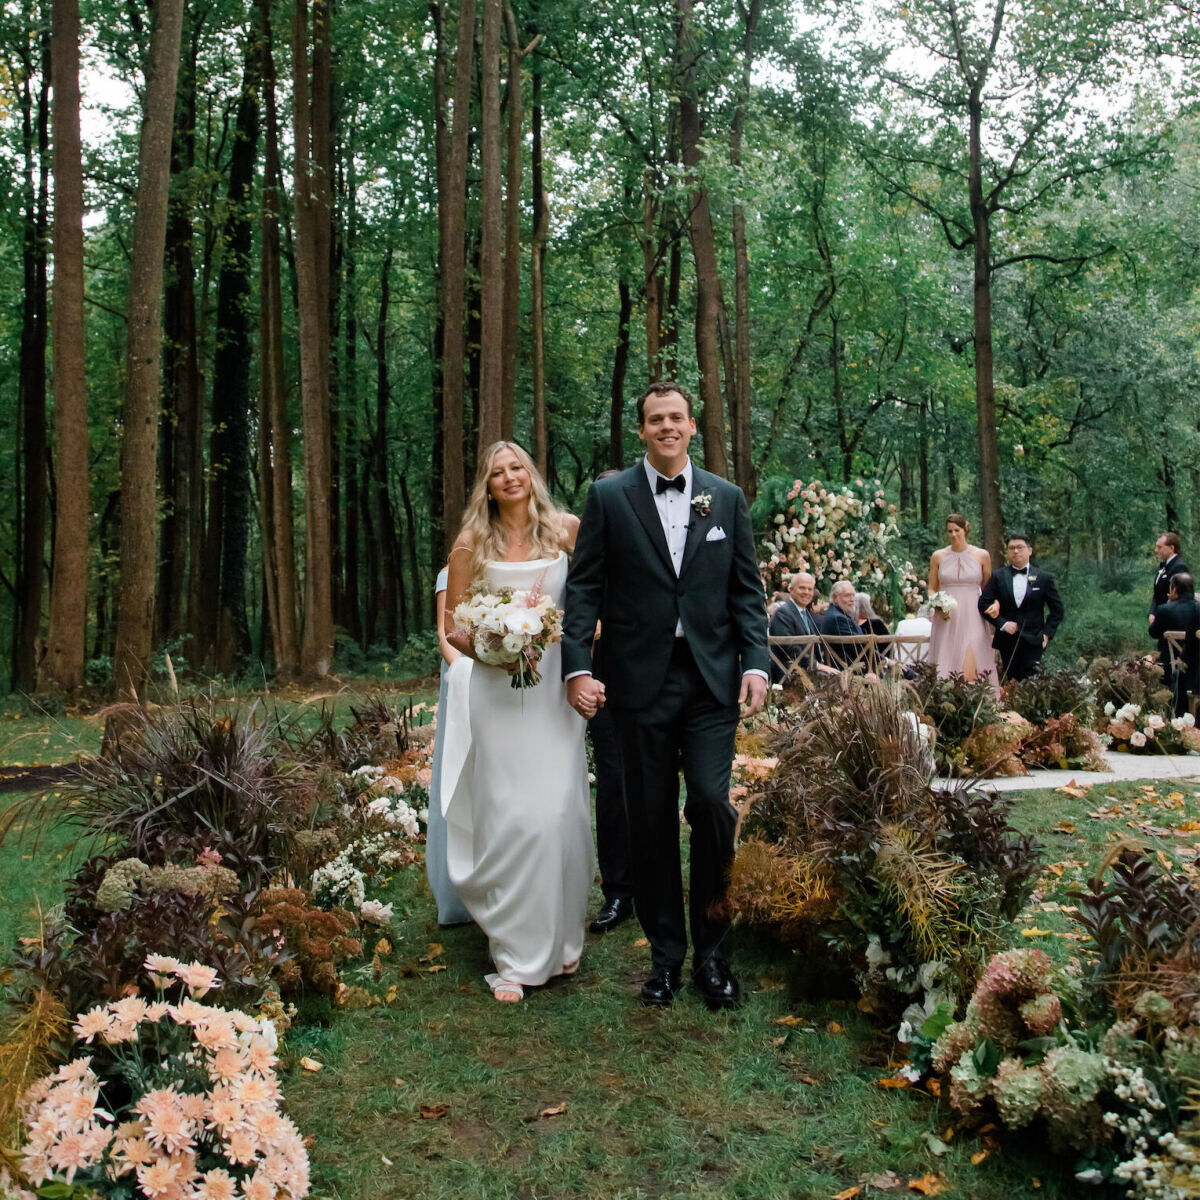 A pair of newlyweds recess up a flower-lined aisle at their rustic outdoor wedding in Virginia.